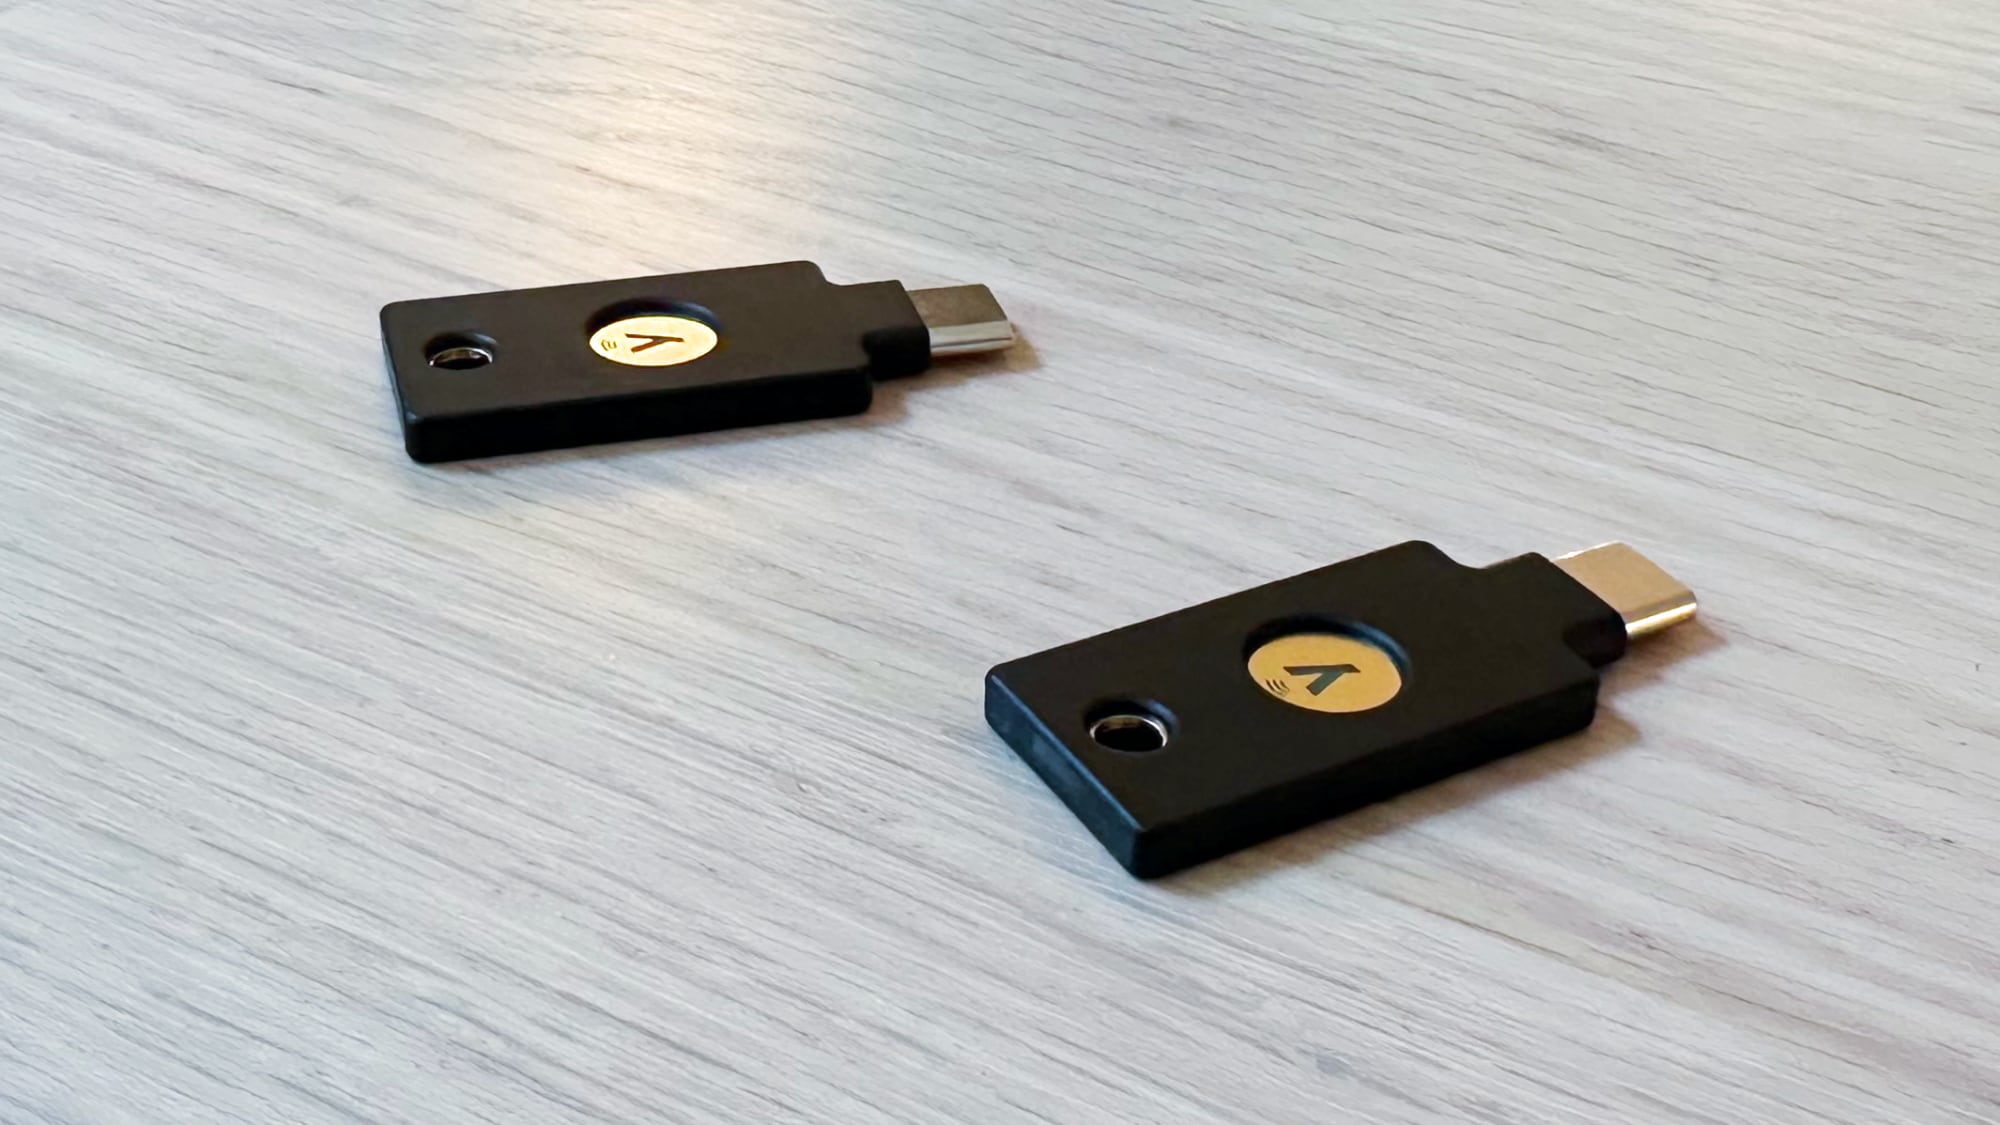 YubiKey 5C NFC kills the last excuse for not getting serious about security